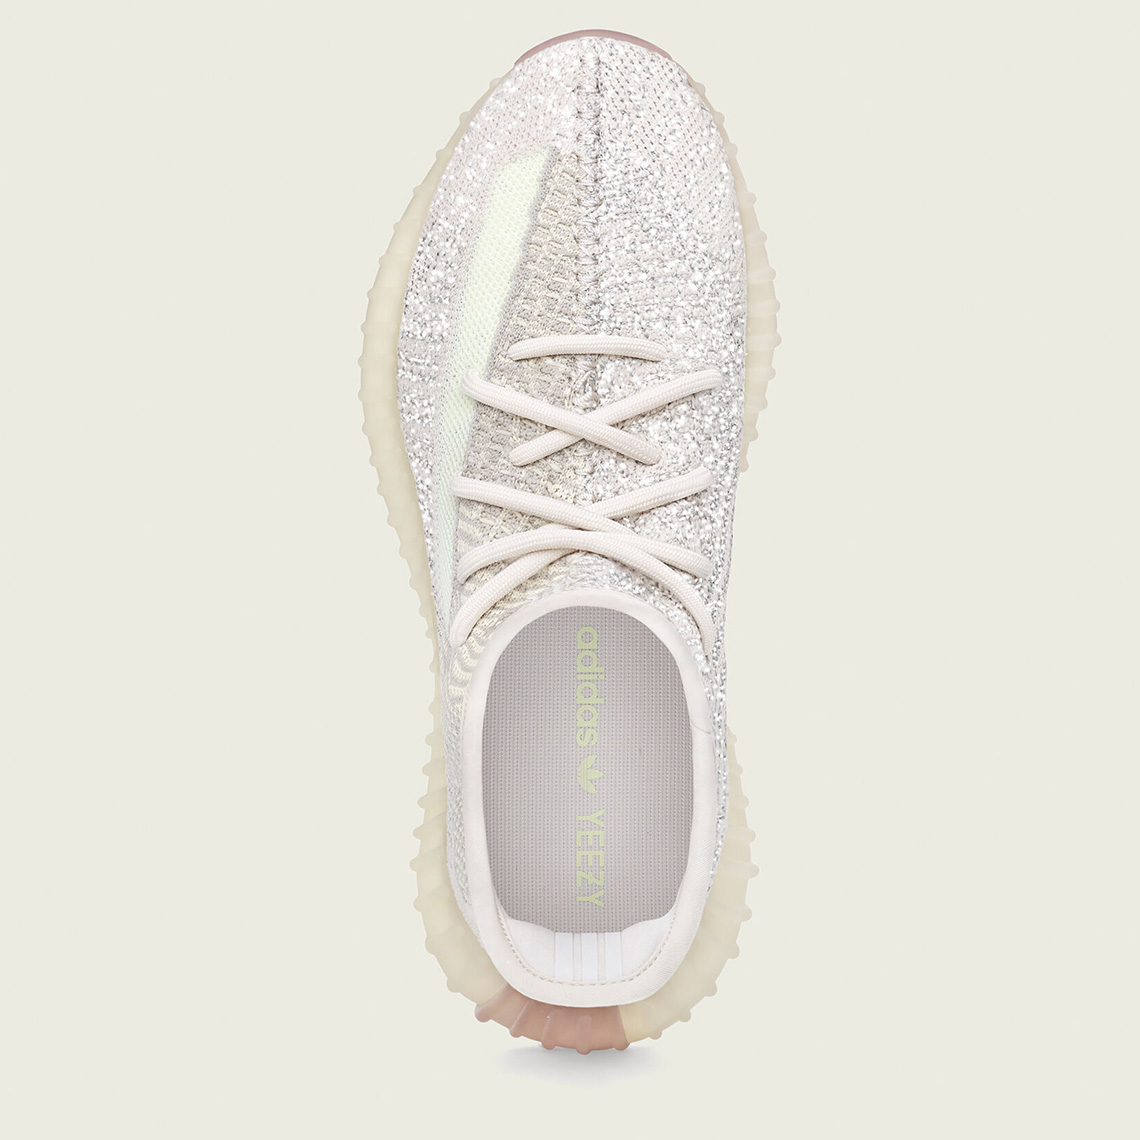 adidas Yeezy Boost 350 v2 Citrin Reflective FW5318 Release Date 